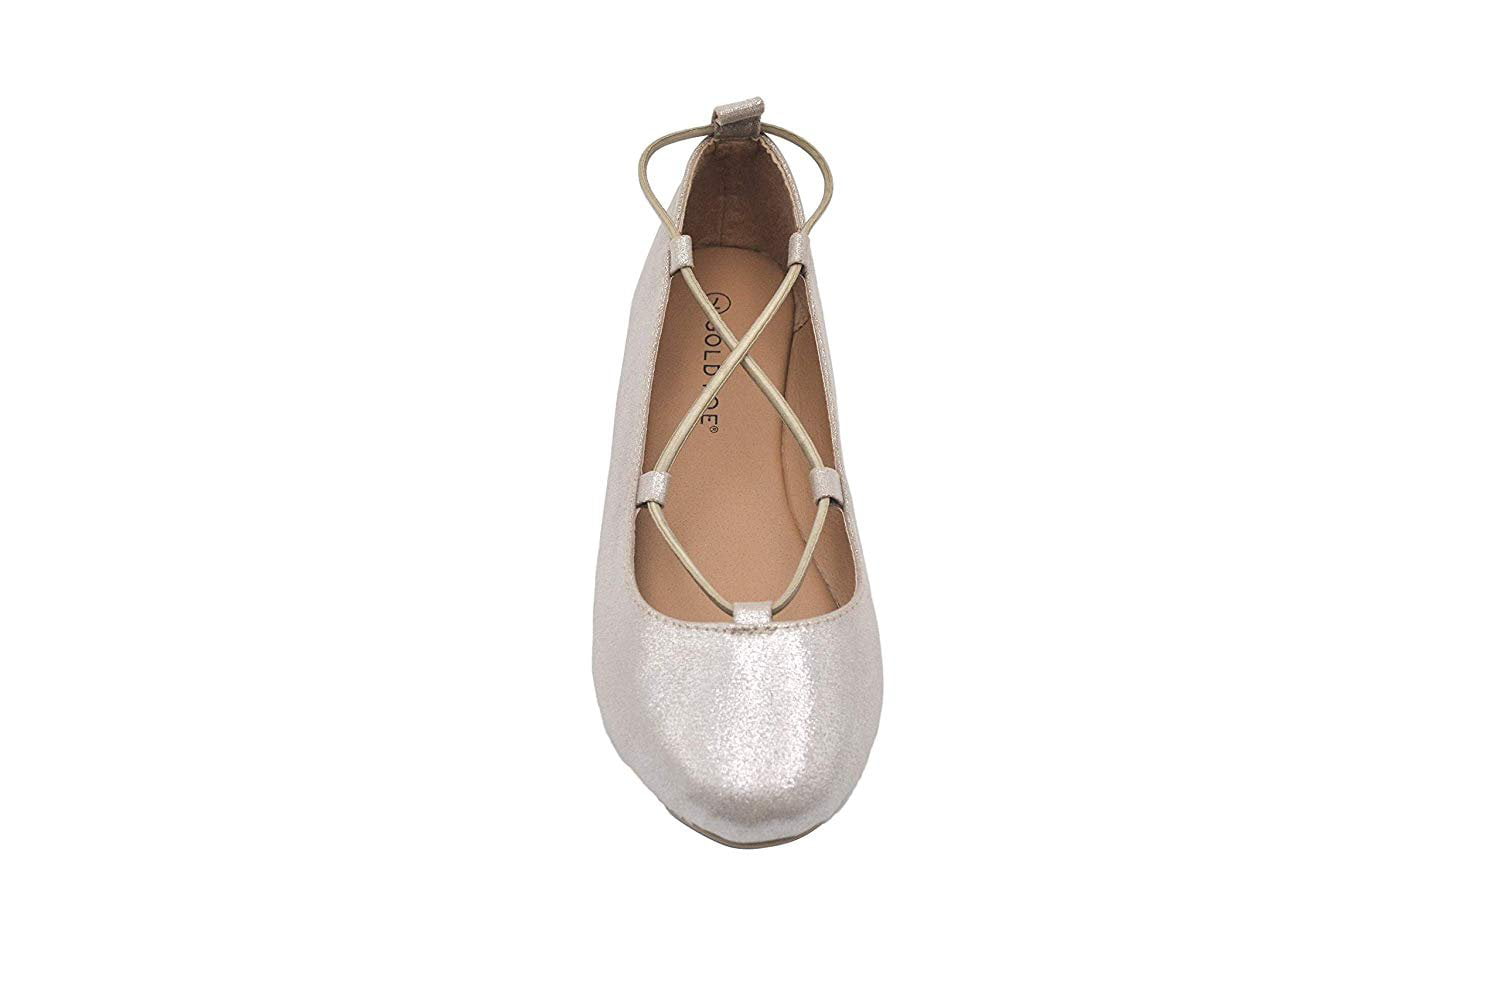 Blank Delvis Premier Gold Toe Ladies Ballet Flats 6 M US Shimmer Micro Shoes with Ghillie  Elastic Light Taupe - Walmart.com